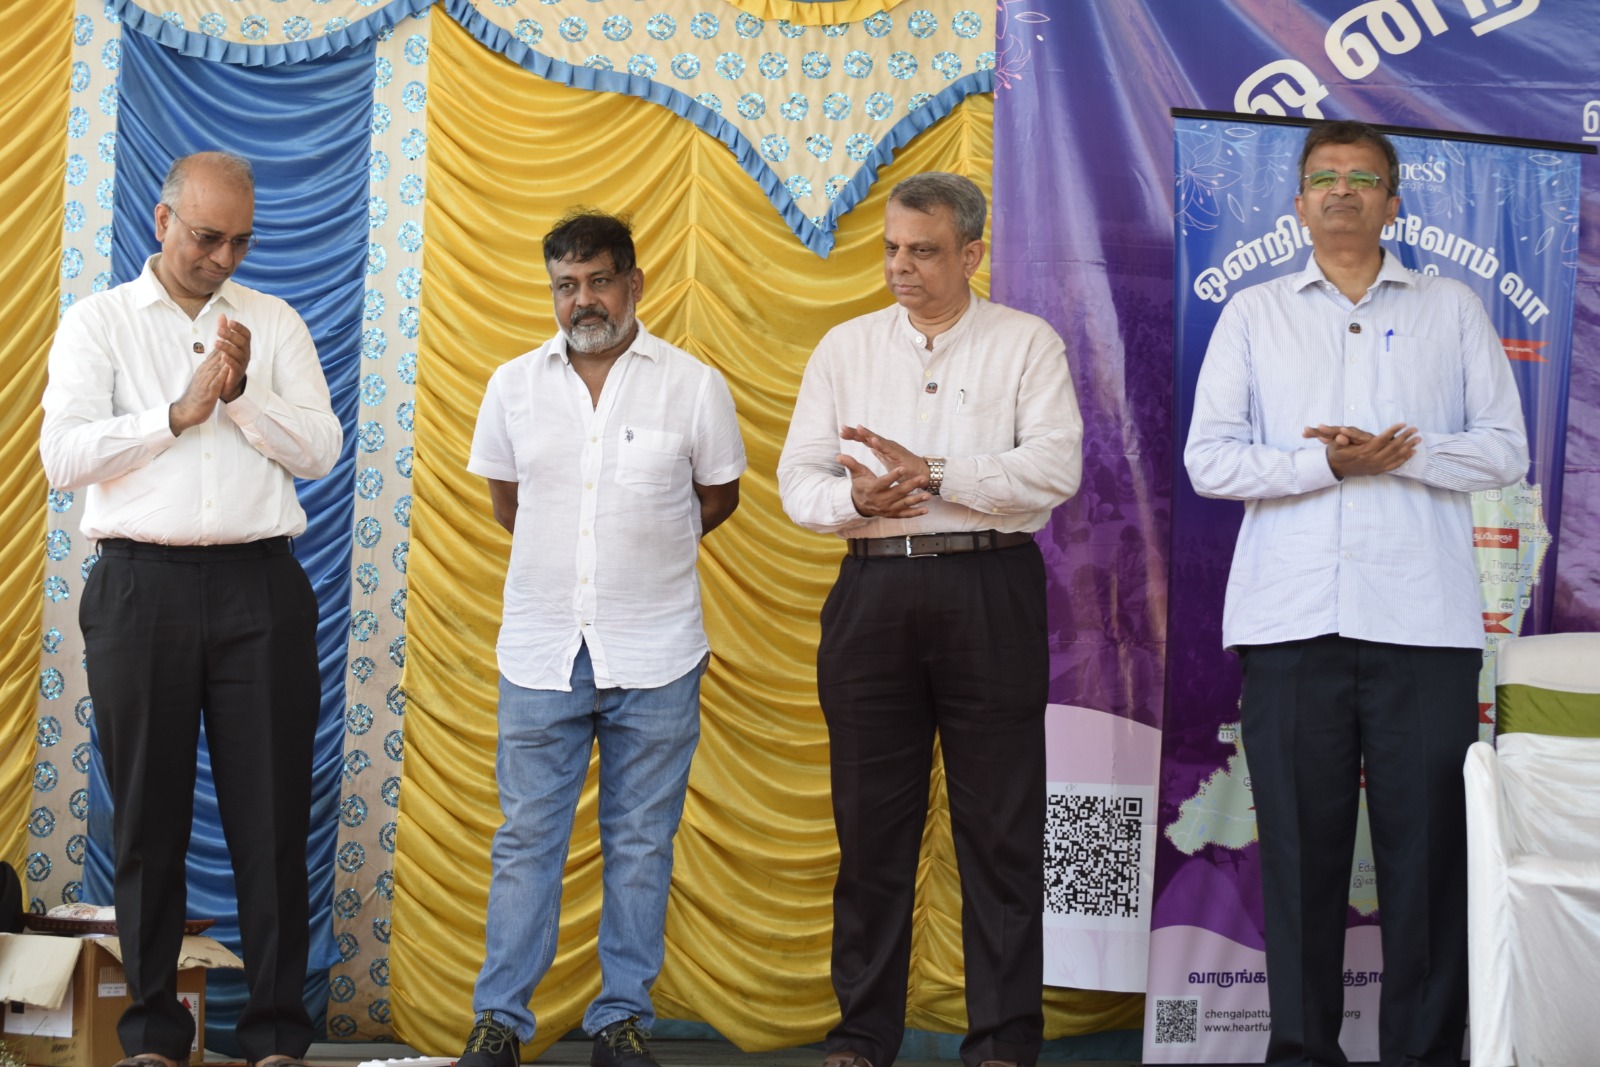 Heartfulness launches ‘Ondrinaivomava’, a 45-day holistic wellness movement touching lives of over 20 lakh people in 600 villages in Chegalpattu district